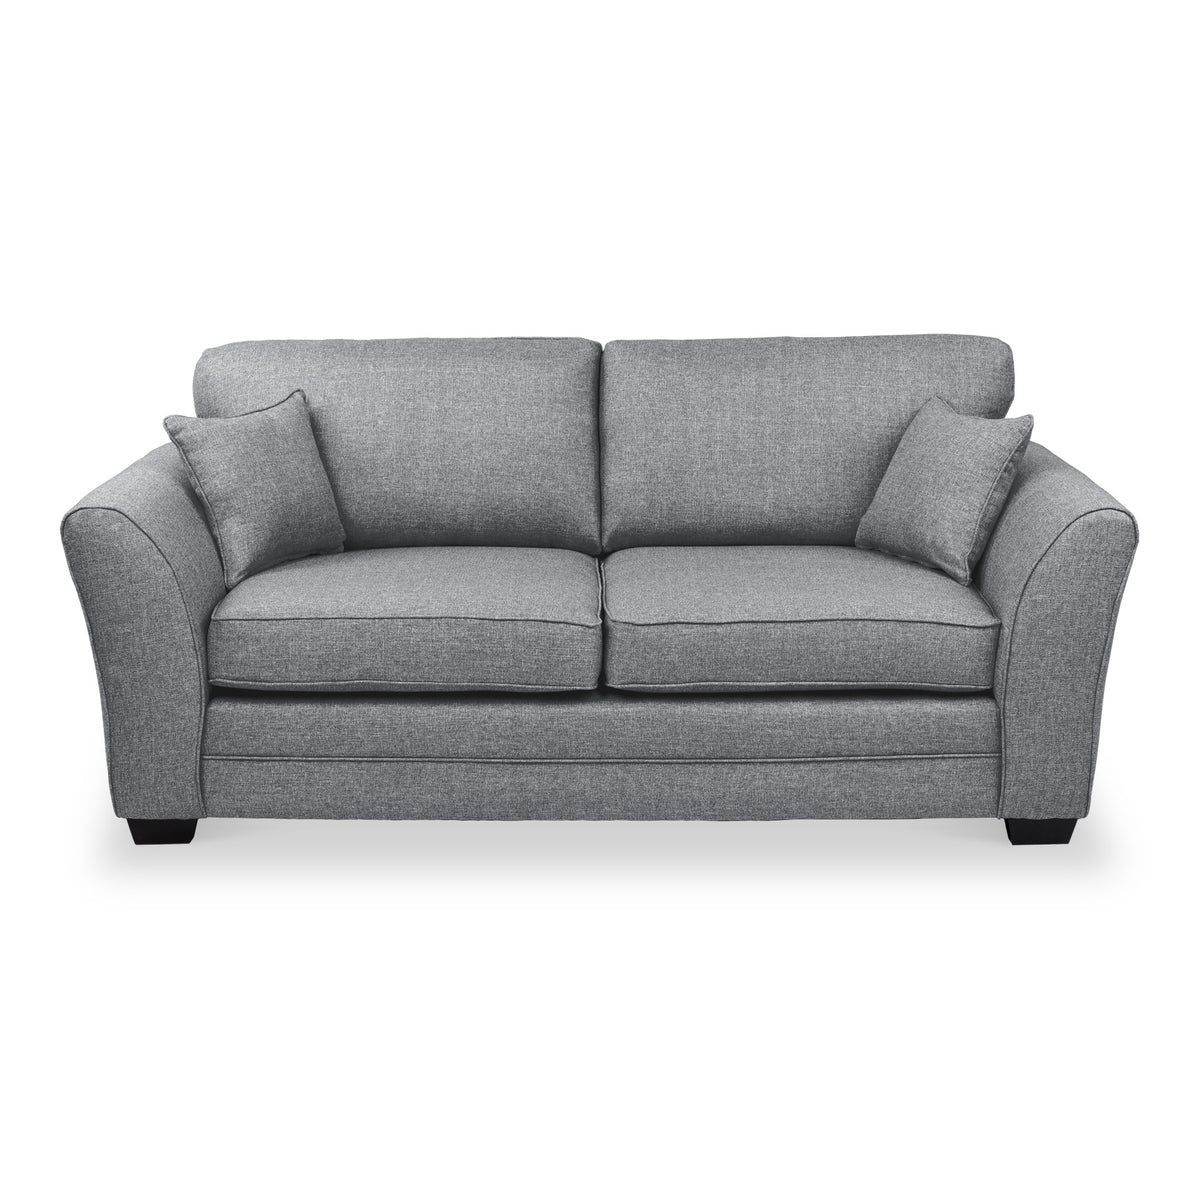 St Ives 3 Seater Sofa in Charcoal by Roseland Furniture